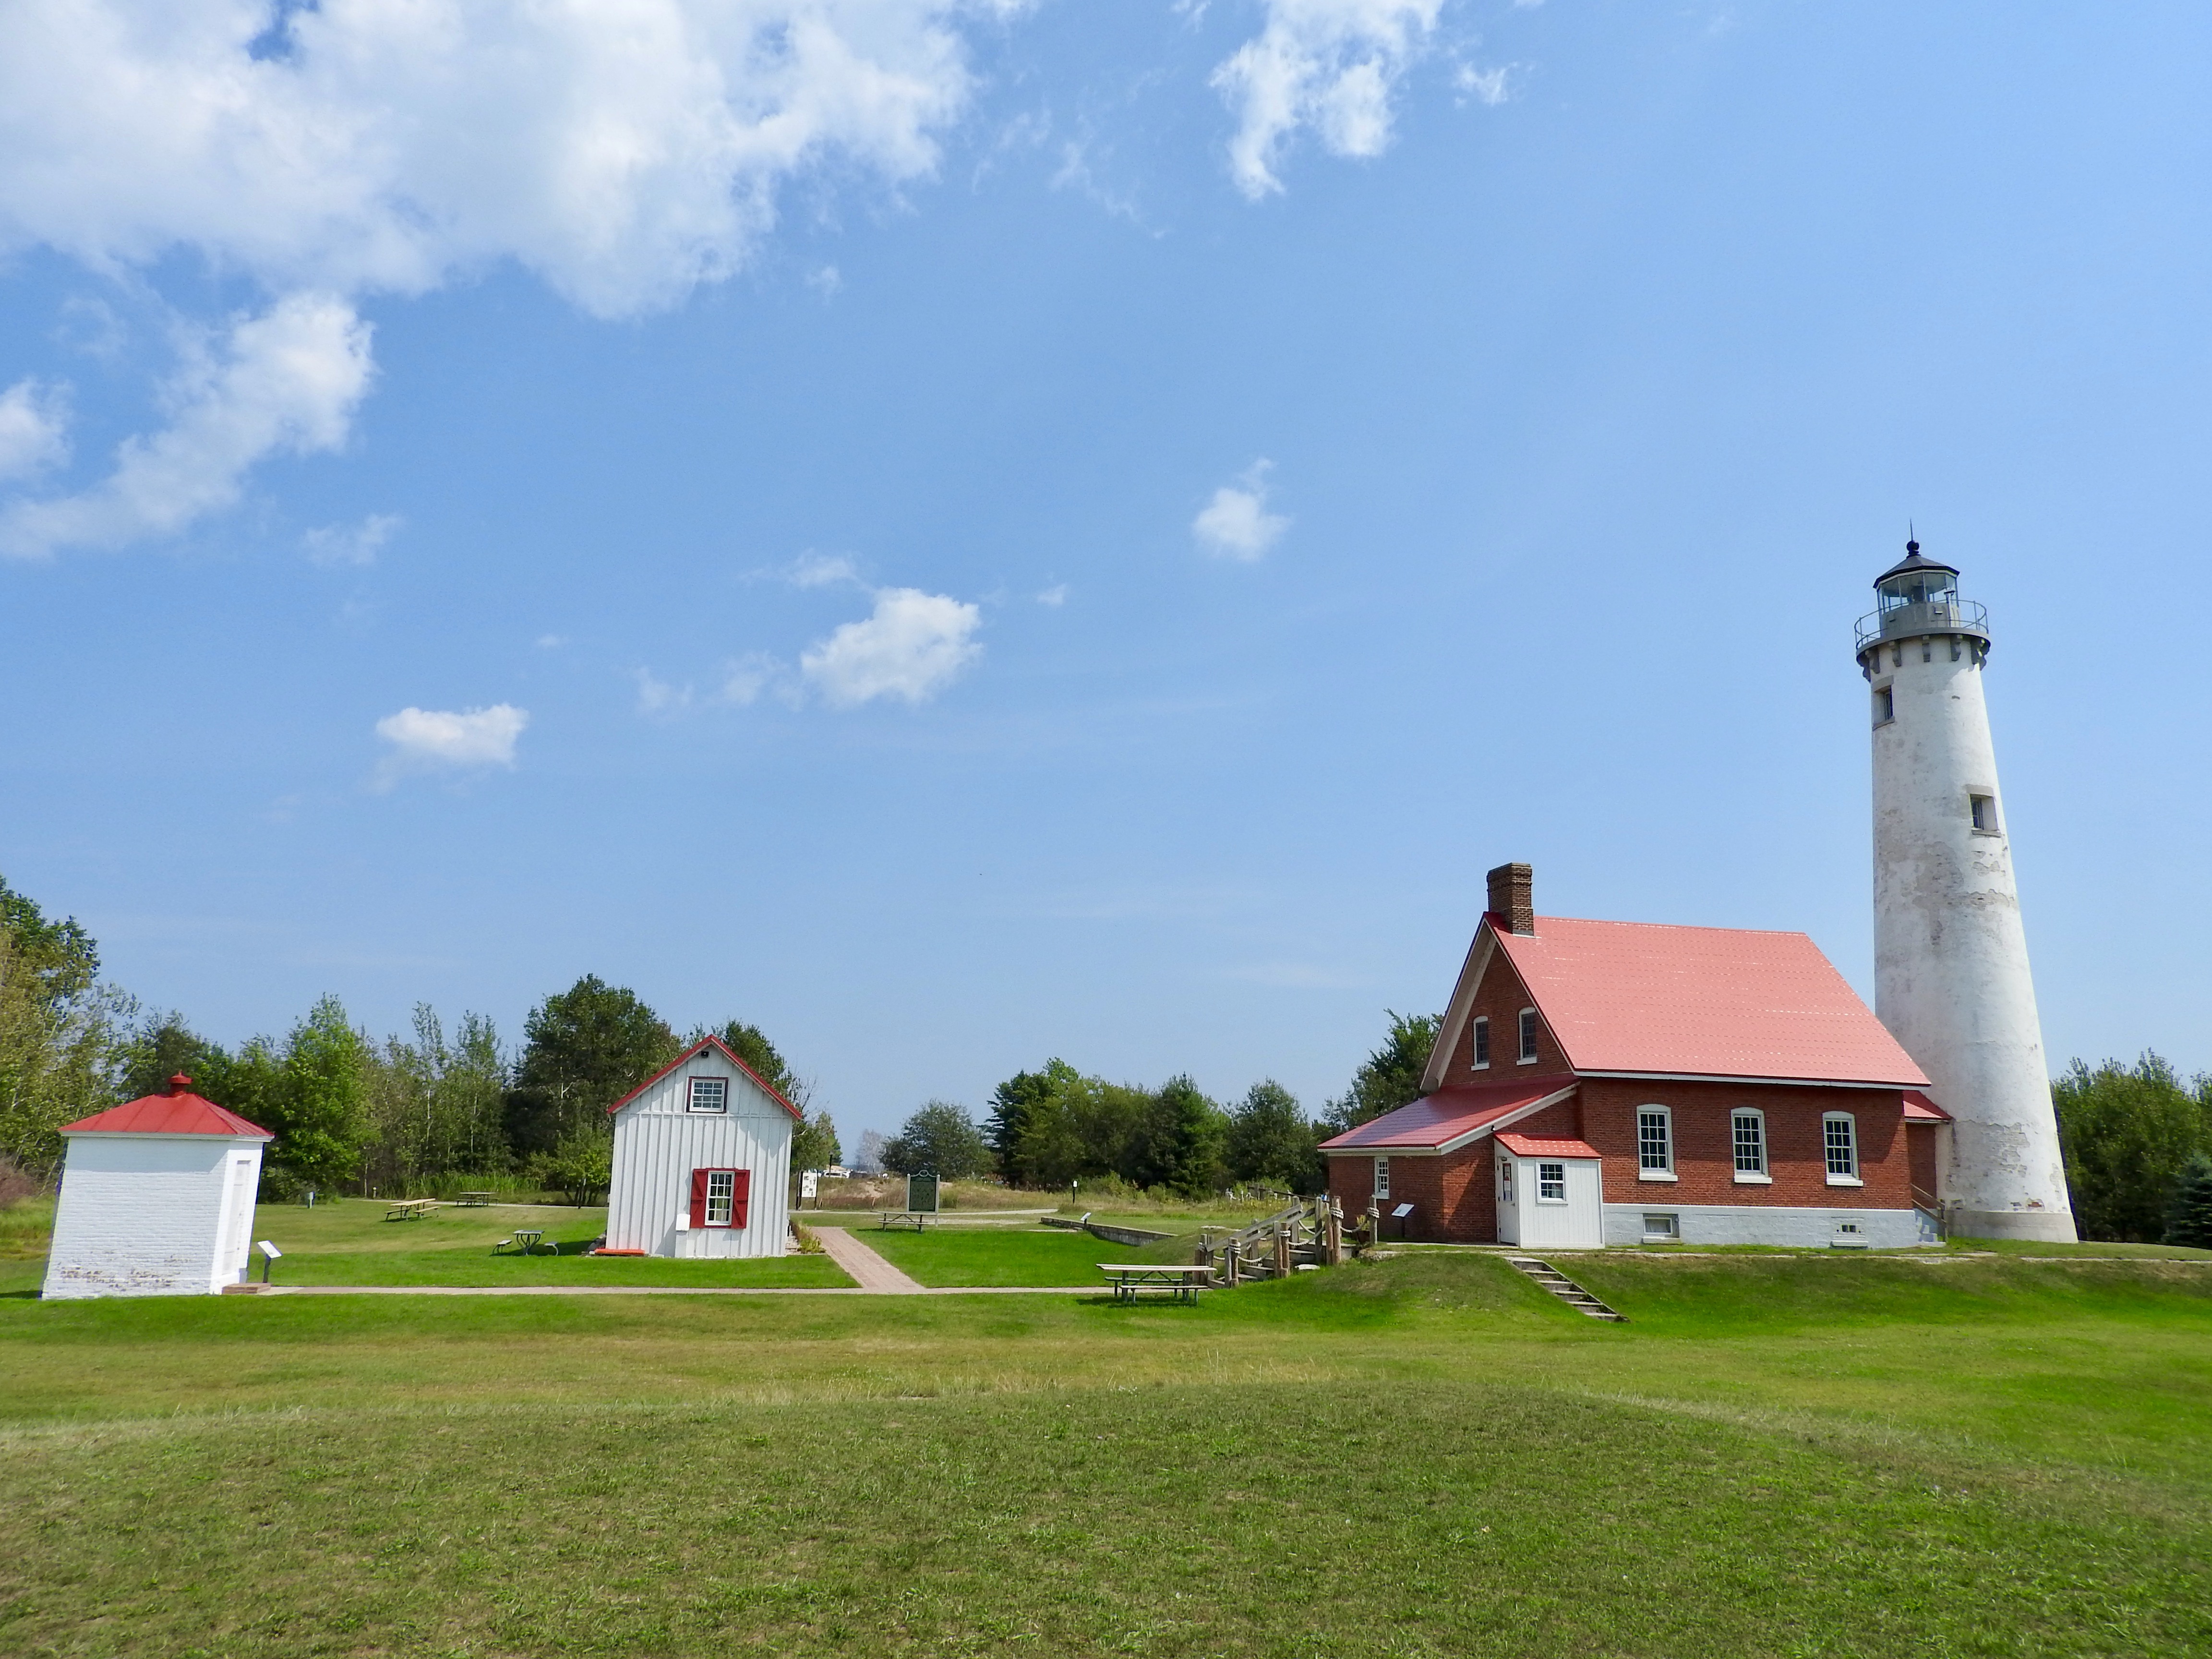 Tawas Point Light Station on Lake Huron, in Michigan. My own photo.